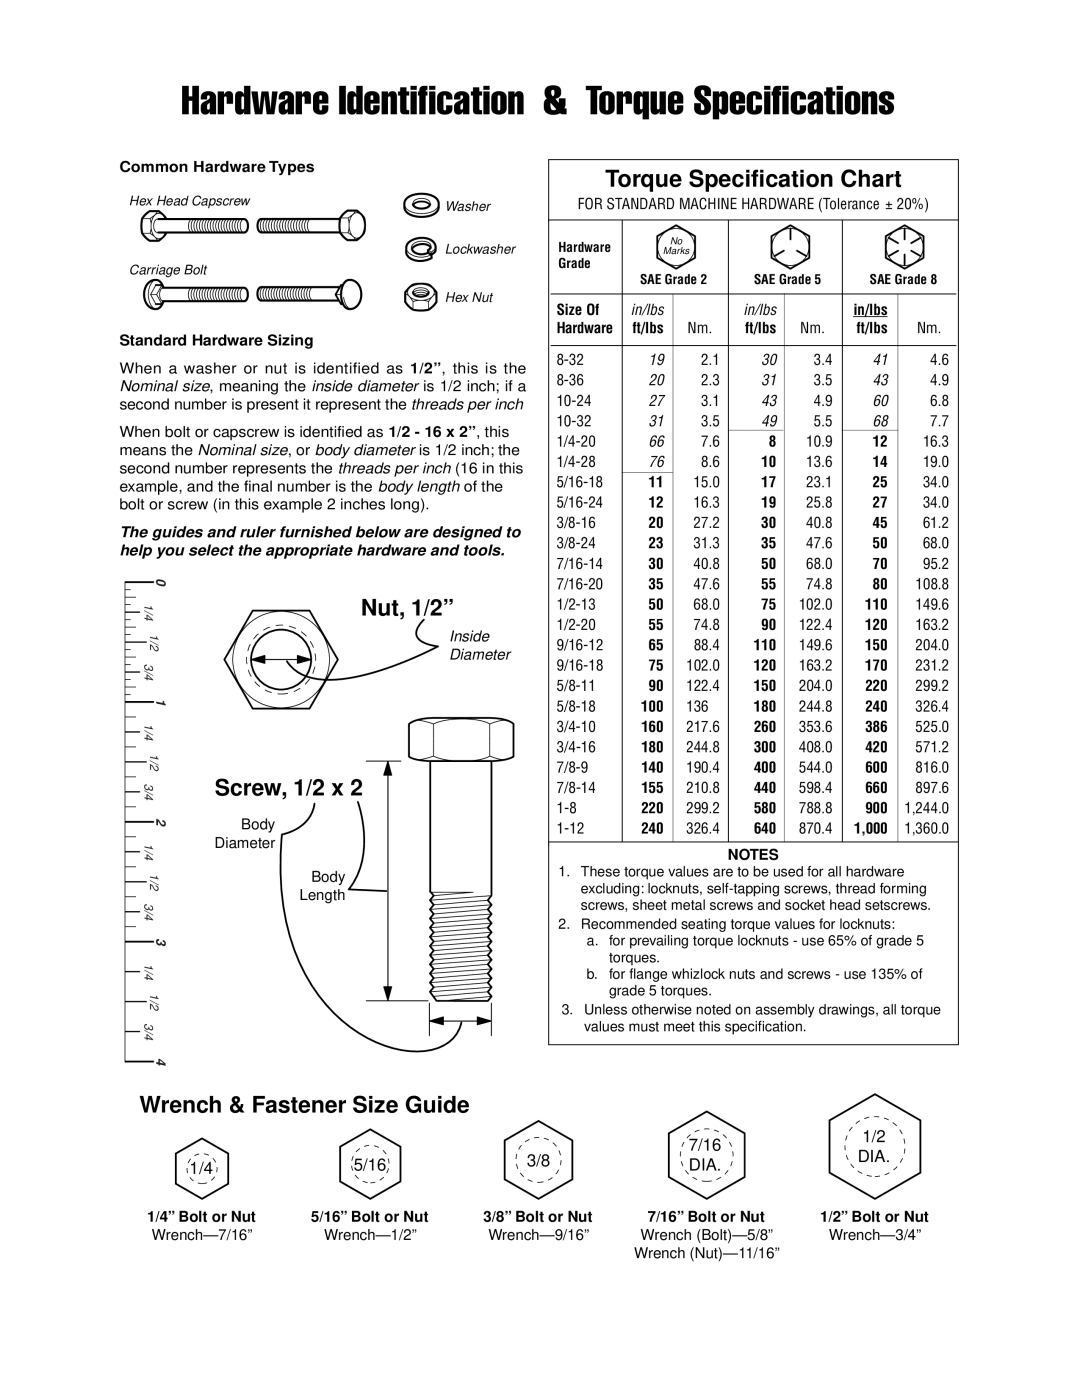 Simplicity 1800 Series Wrench & Fastener Size Guide, Hardware Identification & Torque Specifications, Nut, 1/2”, 7/16 